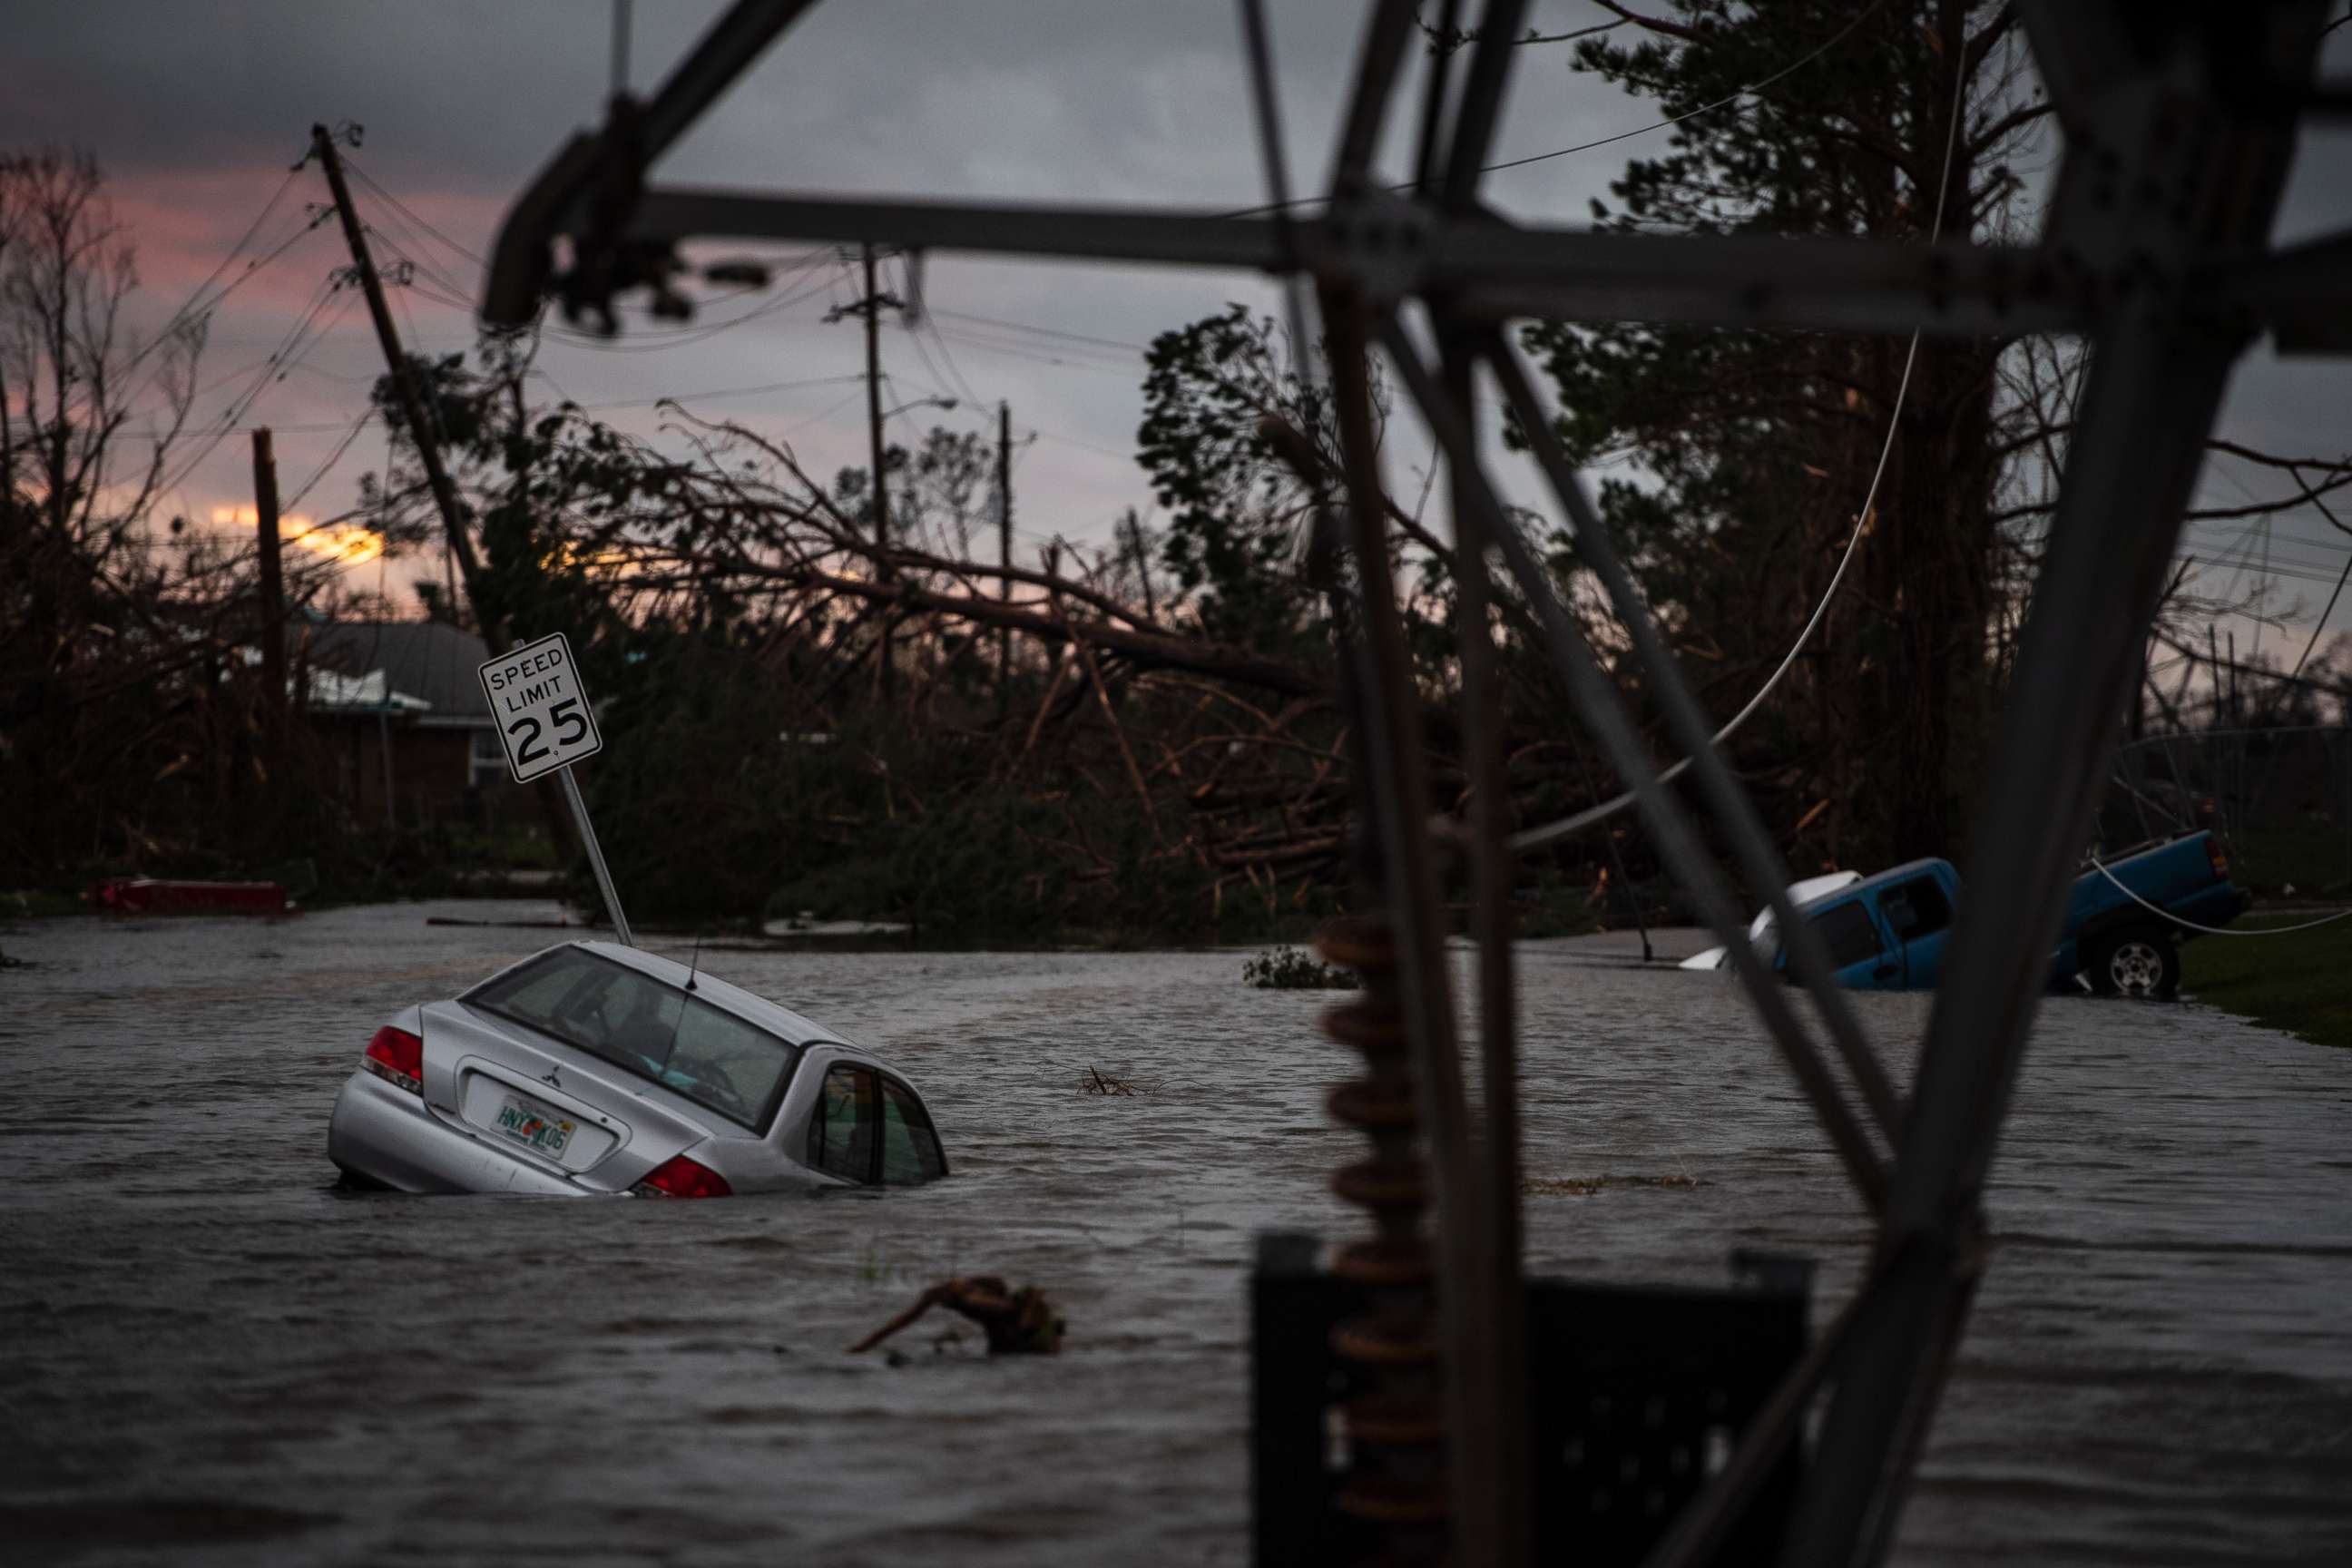 PHOTO: A car is seen caught in flood water after category 4 Hurricane Michael made land fall along the Florida panhandle, Oct. 10, 2018 in Panama City, Fla.